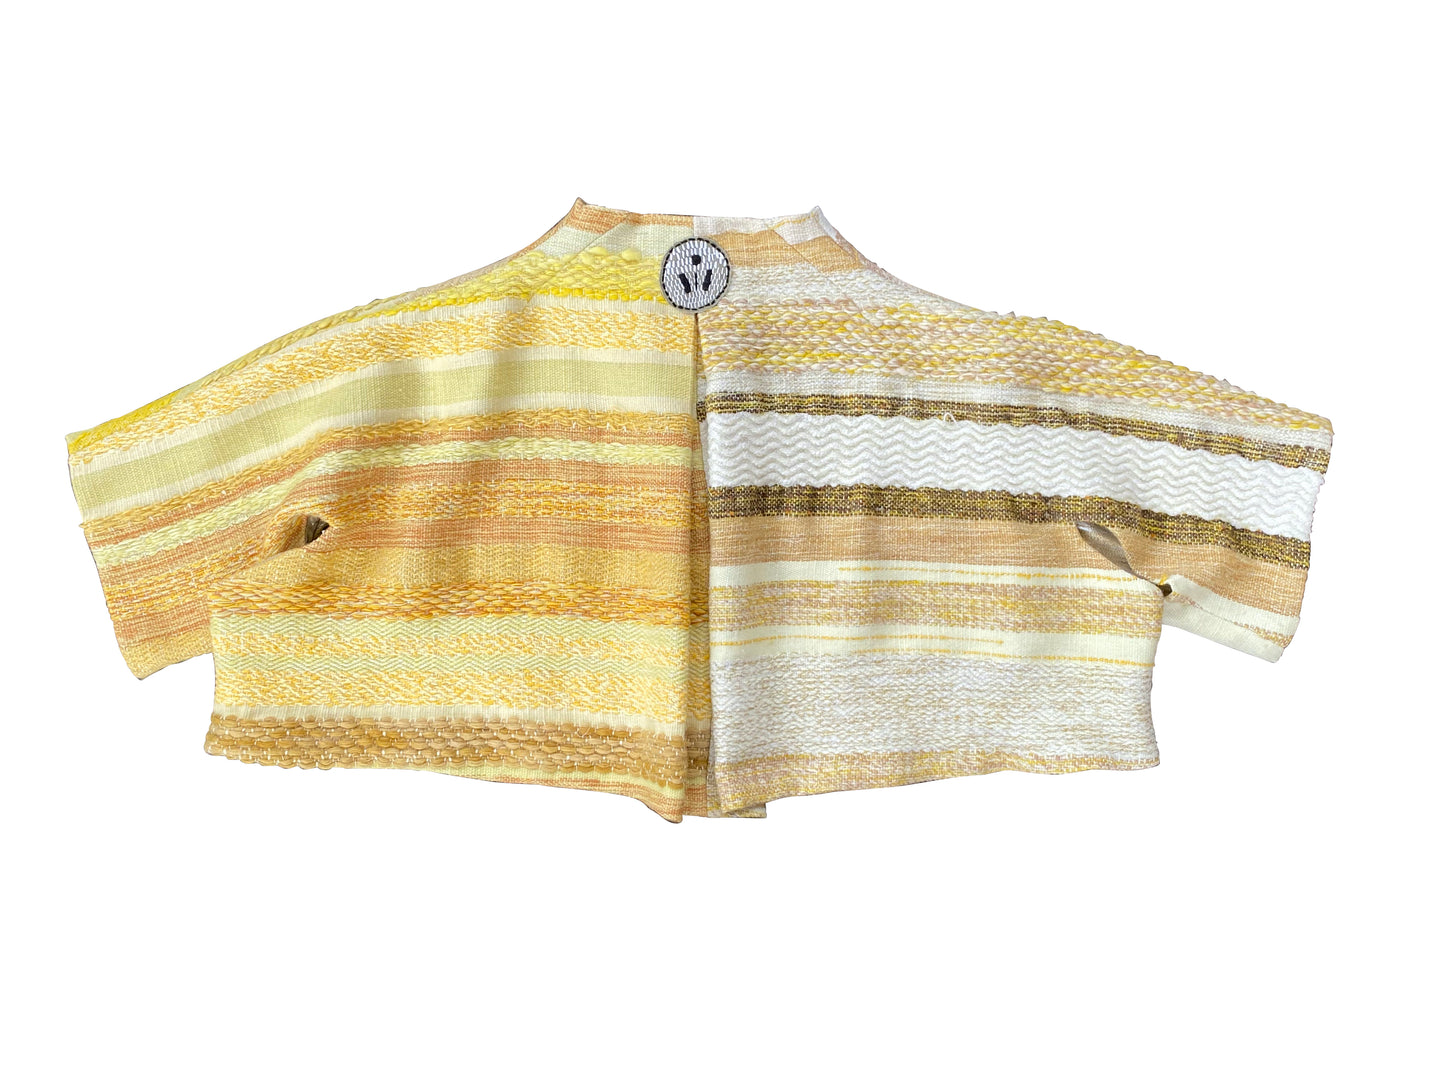 Artisanal Hand-Woven 'Sunny Scene' Cropped Jacket in Wool, Mohair & Viscose